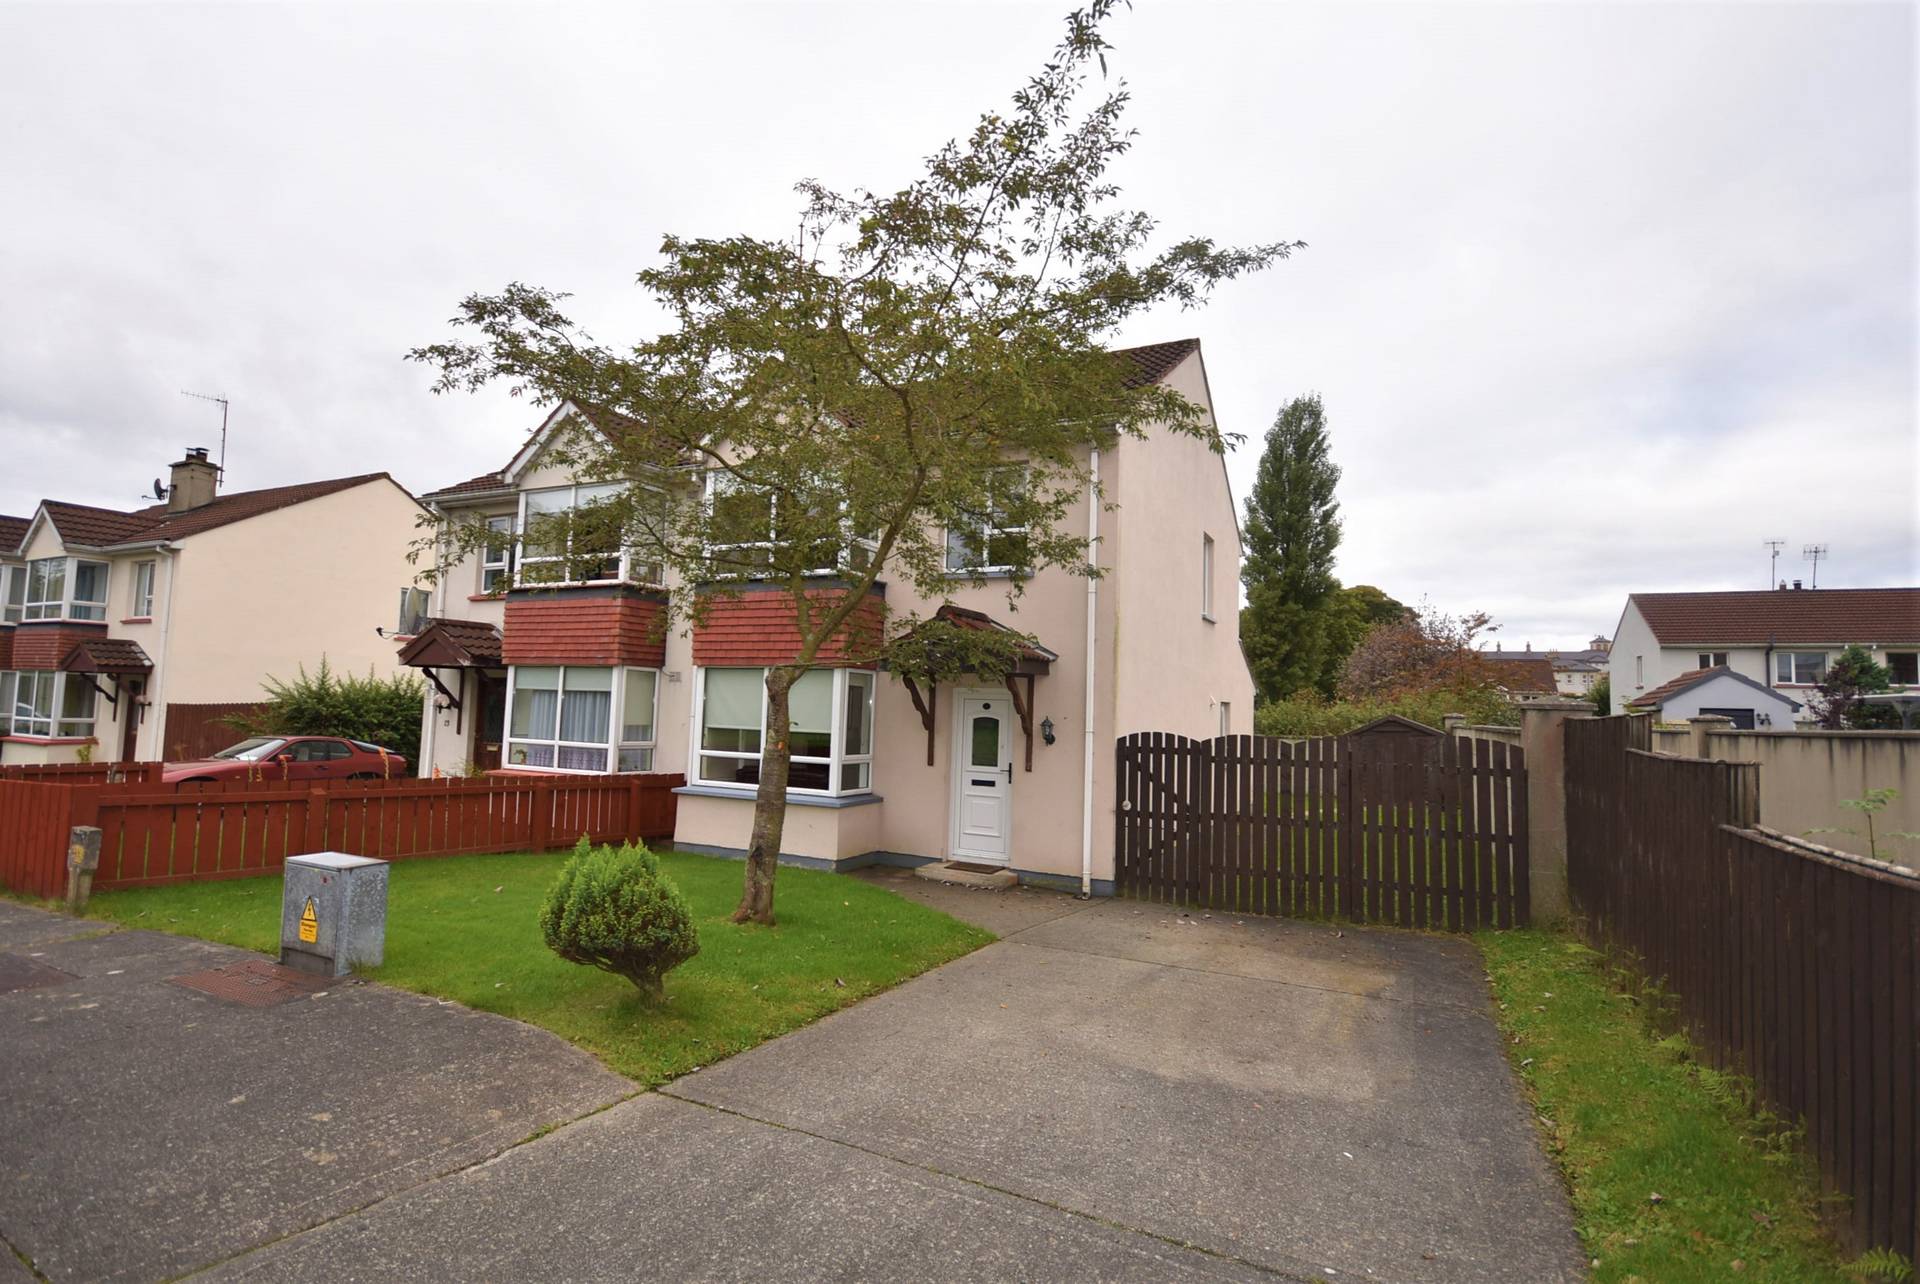 14 Whitethorn Close, Letterkenny, Co. Donegal, F92 T26H